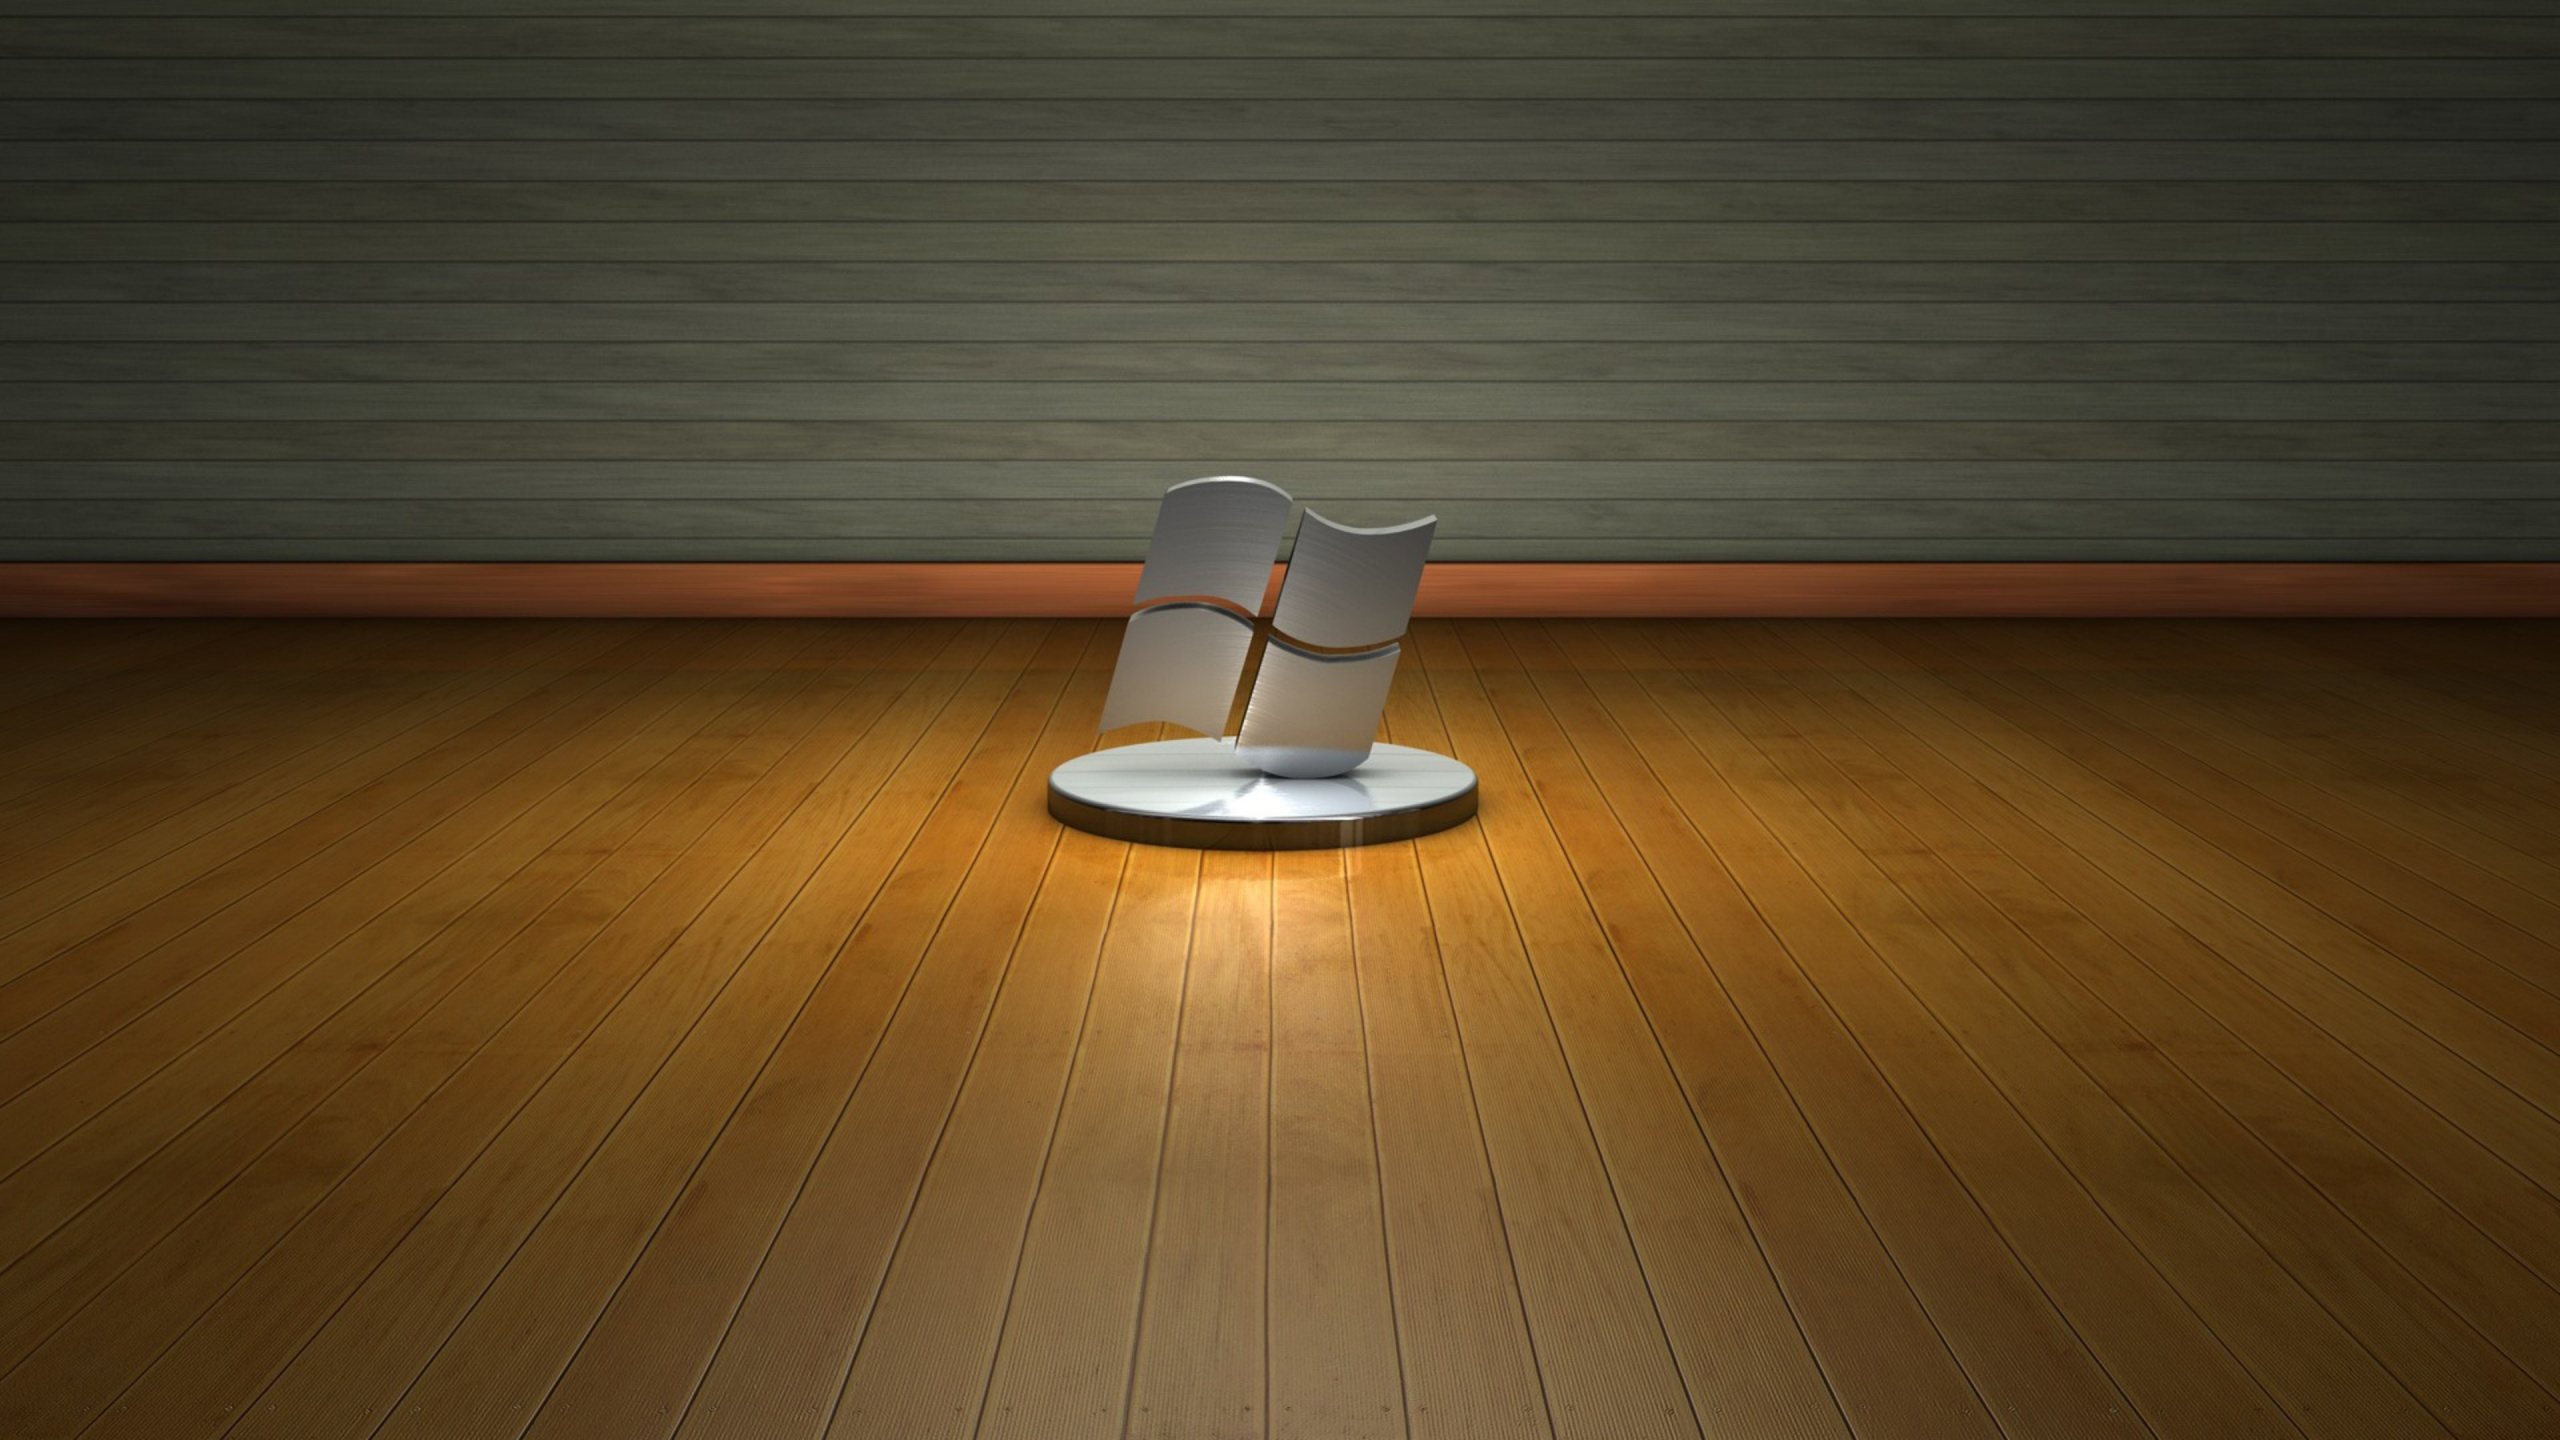 White Chair on Brown Wooden Floor. Wallpaper in 2560x1440 Resolution